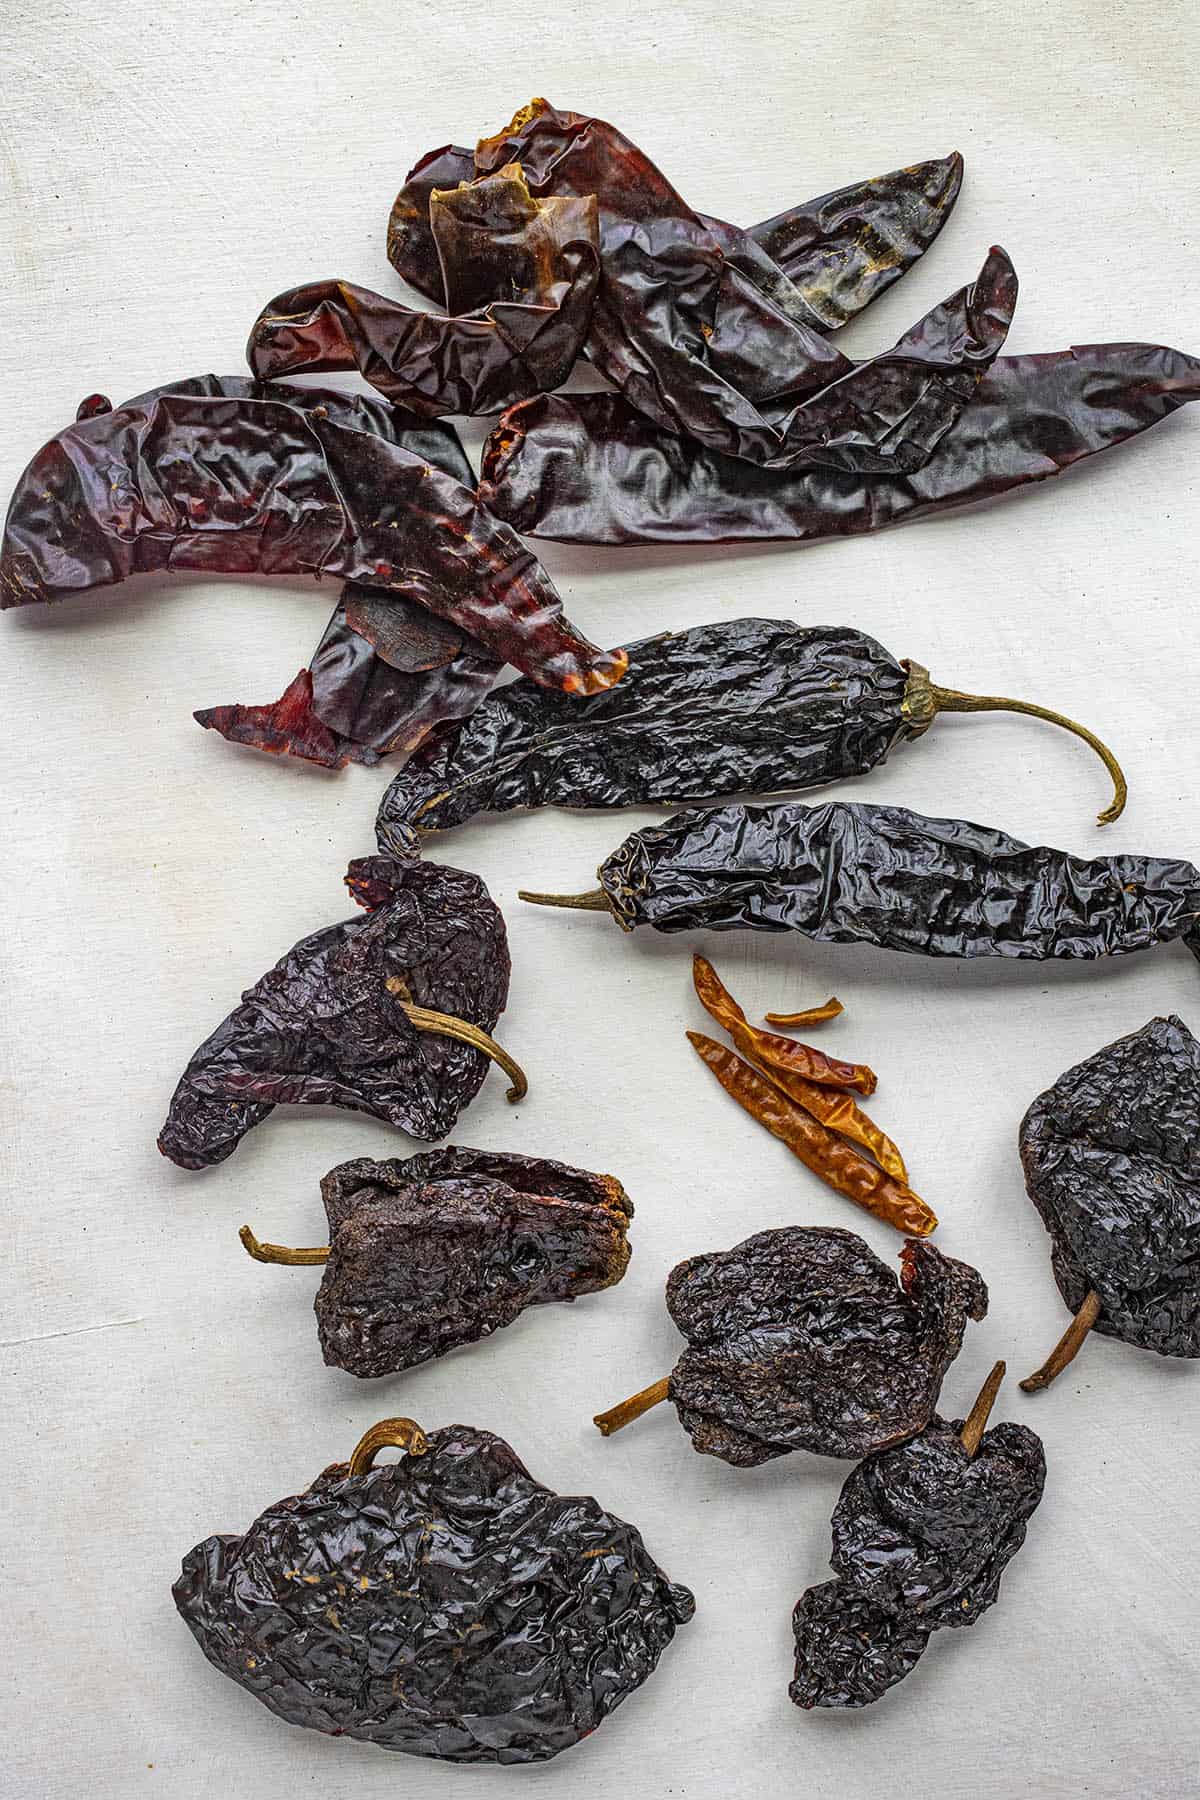 4 types of Mexican chili peppers for making Chili Colorado